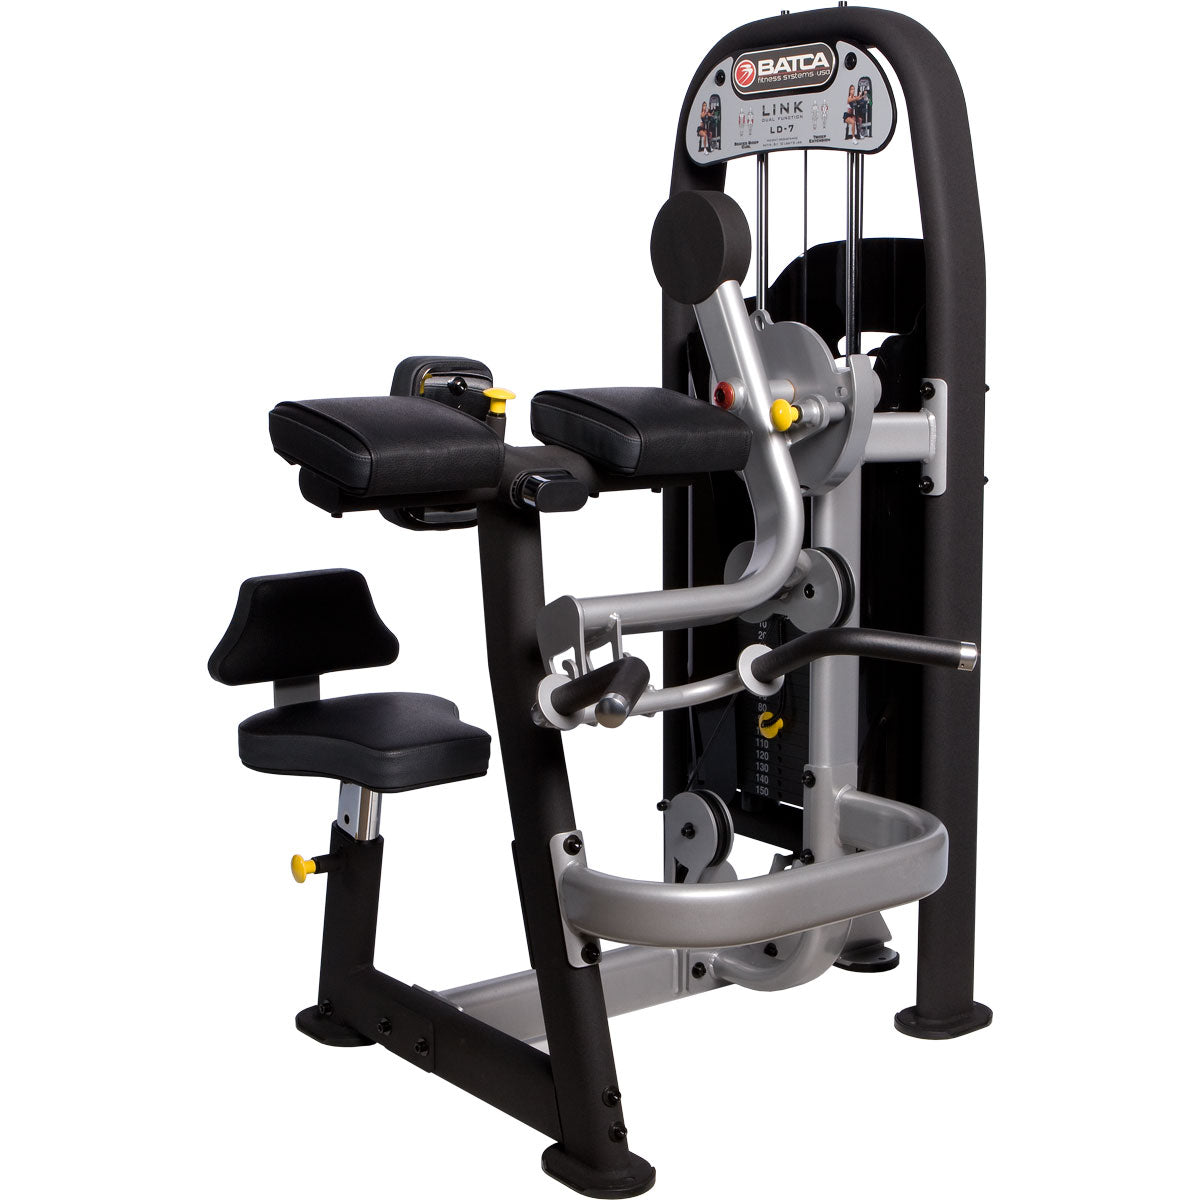 Abdominal fitness apparatus - BENCH - TECHNOGYM - for fitness trails / home  / commercial